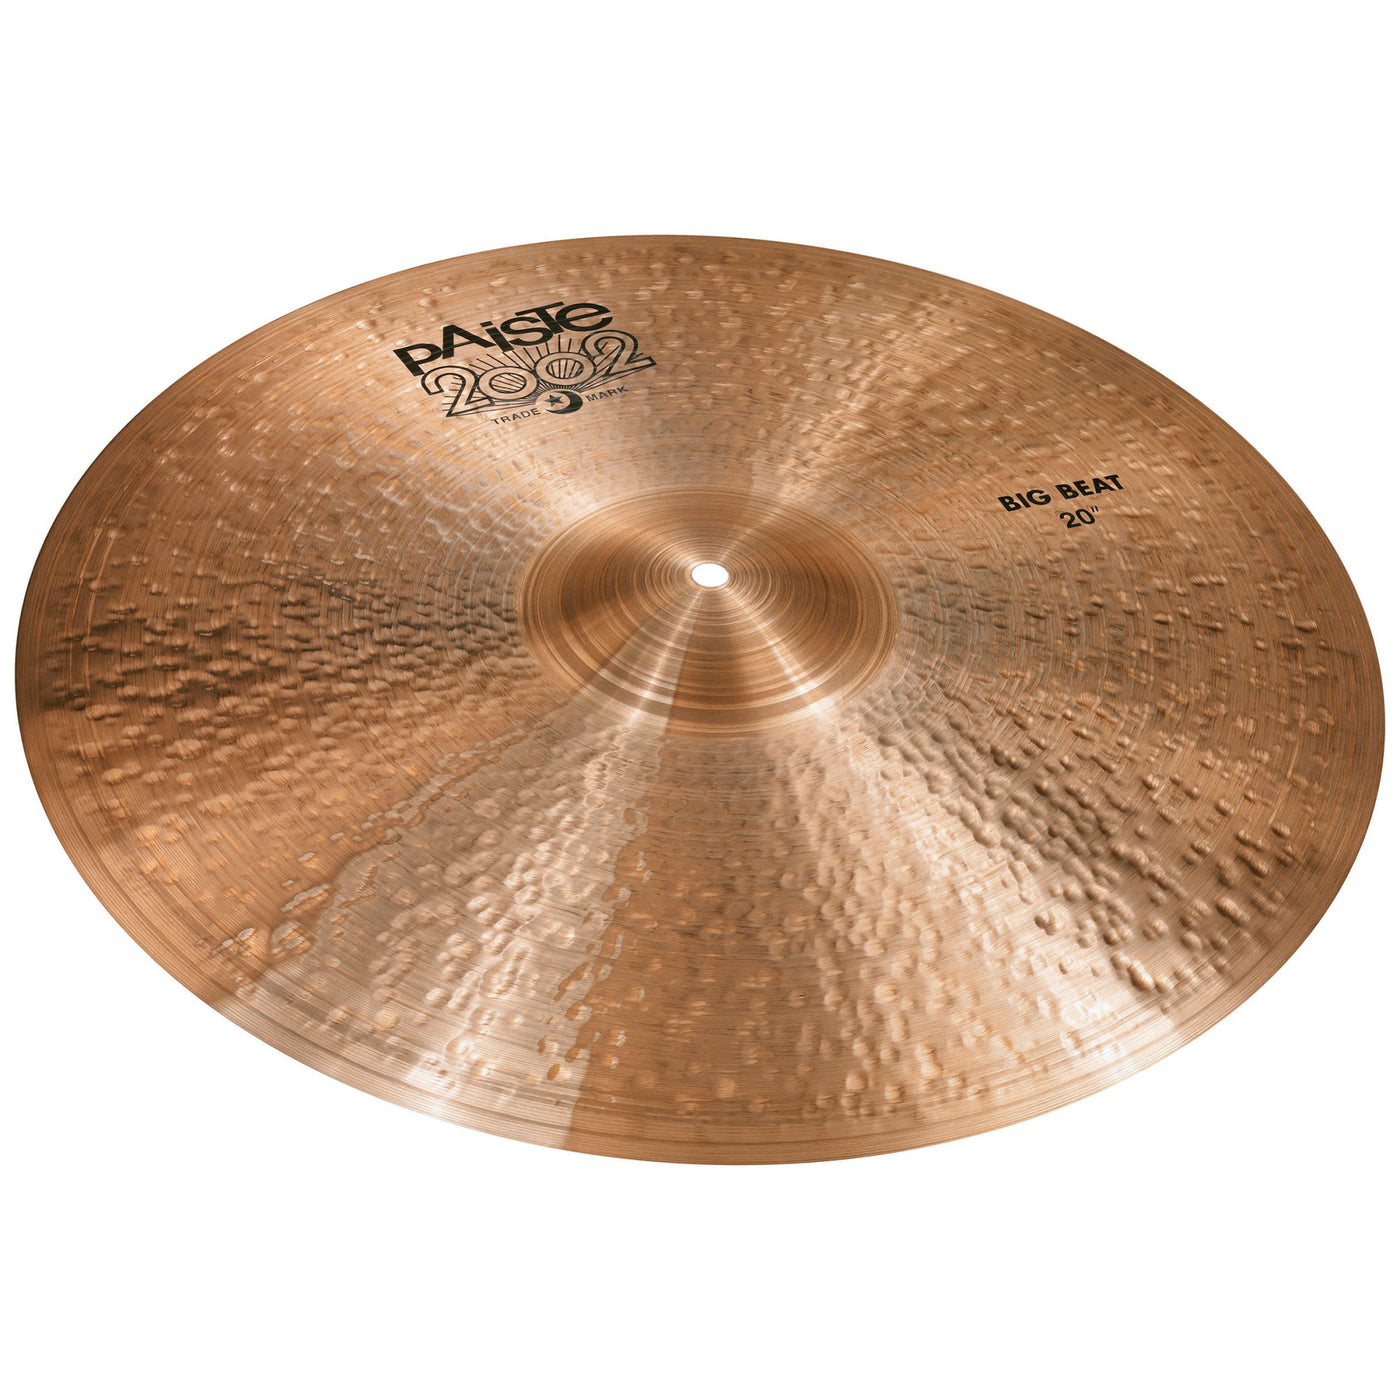 Paiste 1068520 Big Beat Crash/Ride Cymbal, 2002 Series, Percussion Instrument for Drums, 20"